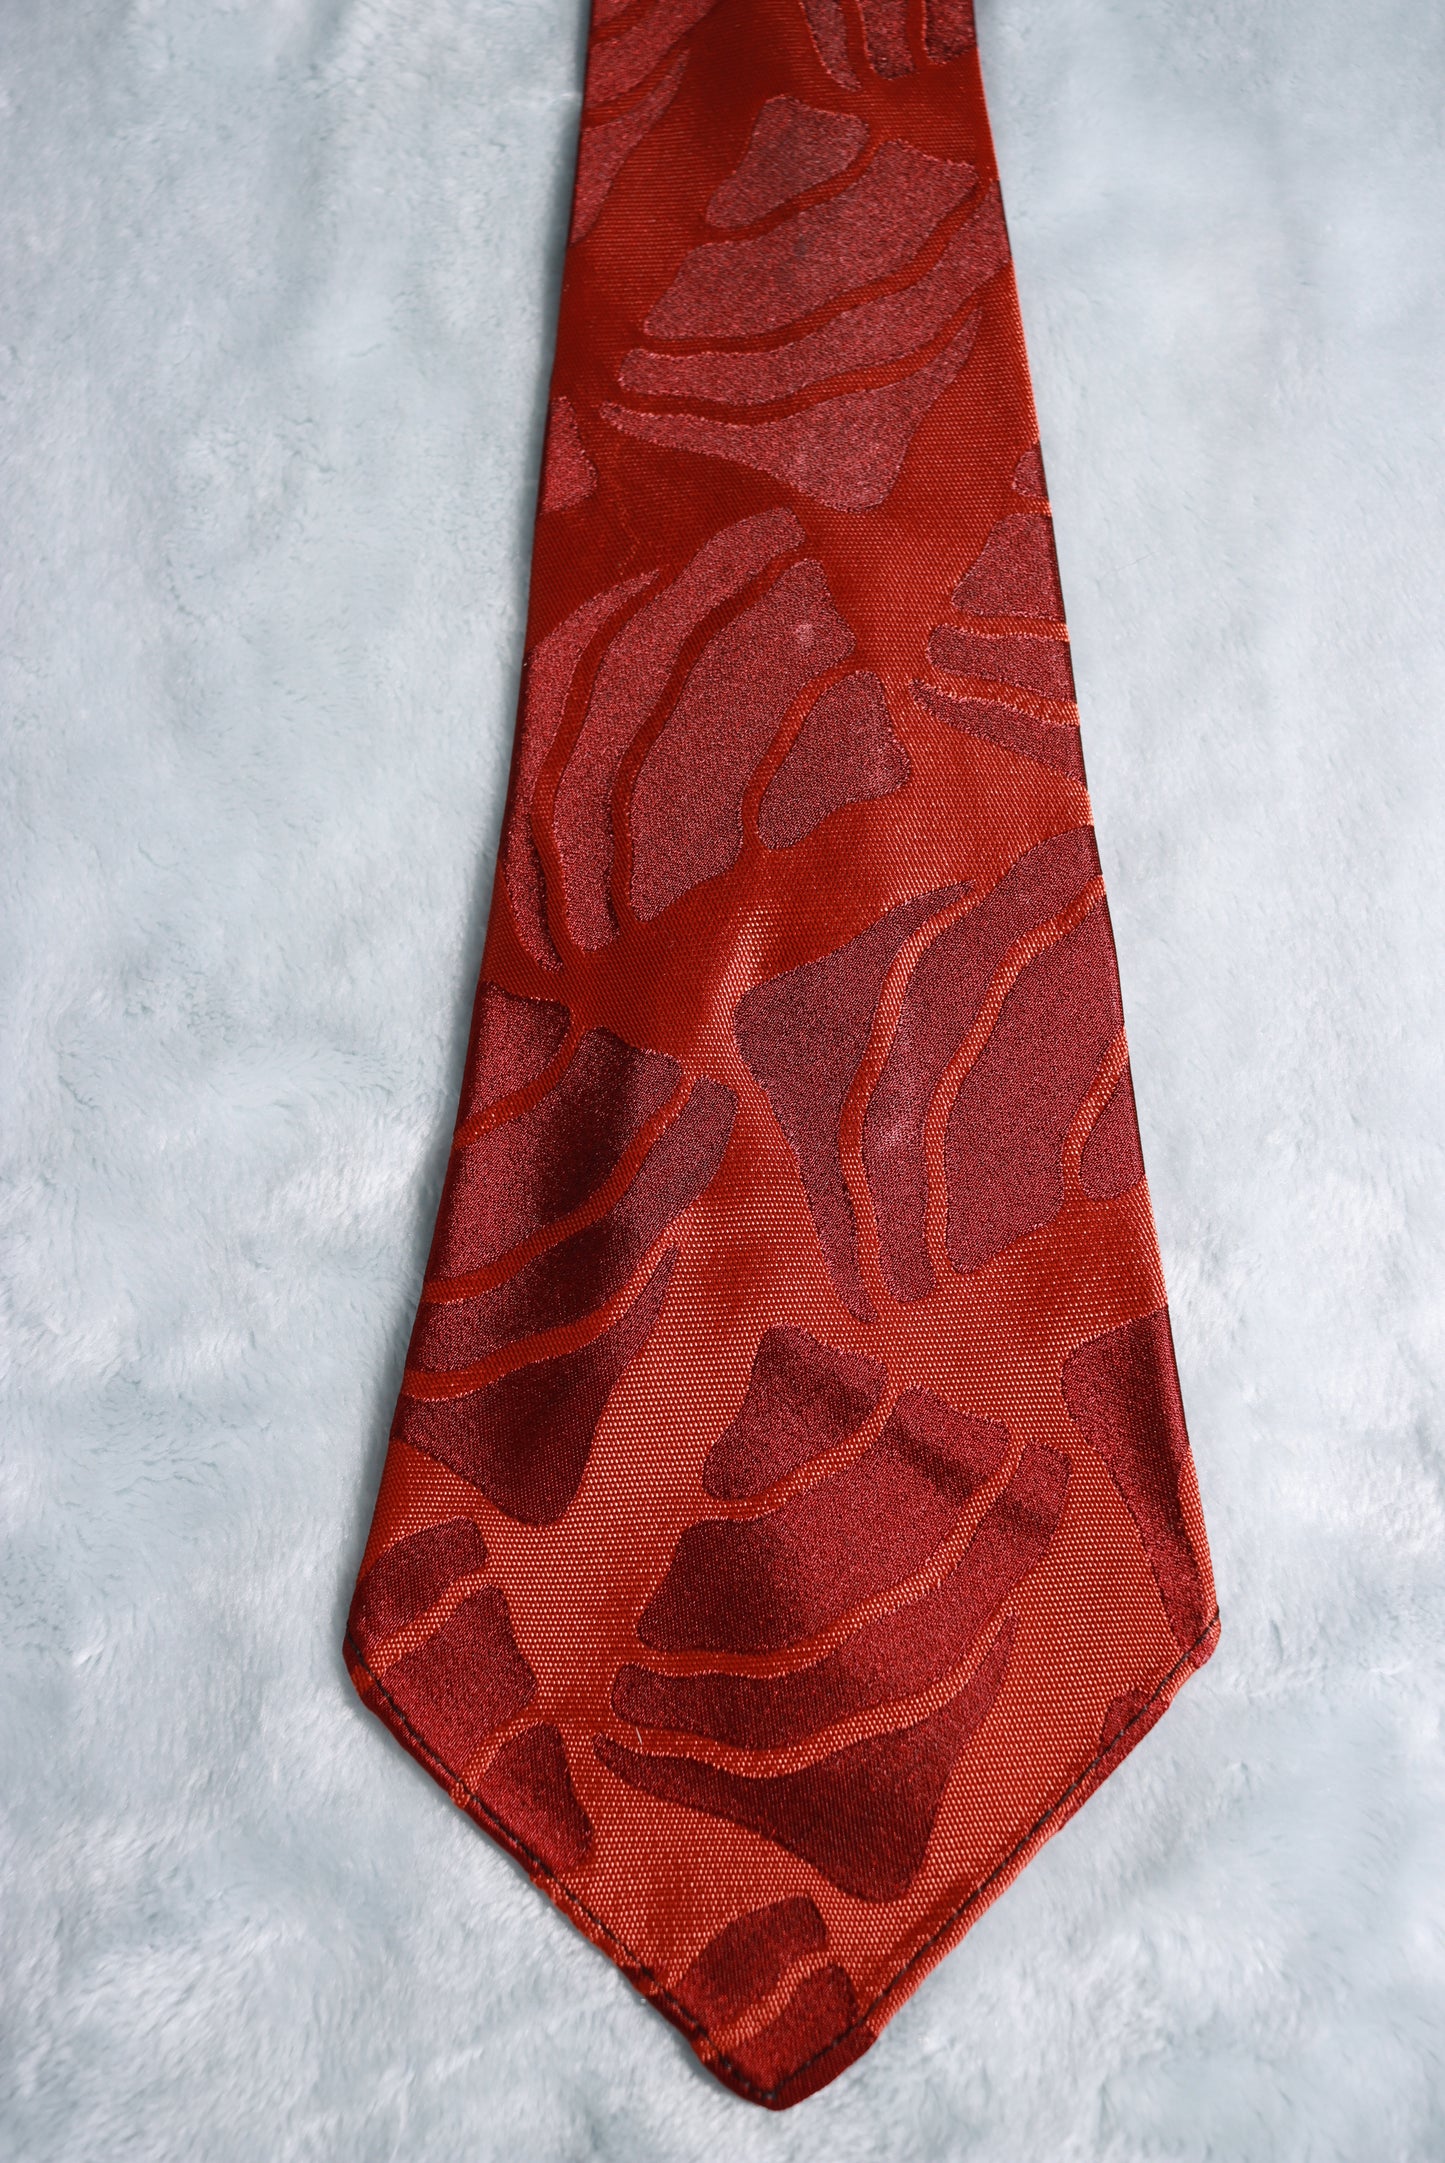 Vintage Rike's Store For Men Jacquard Abstract Swing Tie 1940s/50s